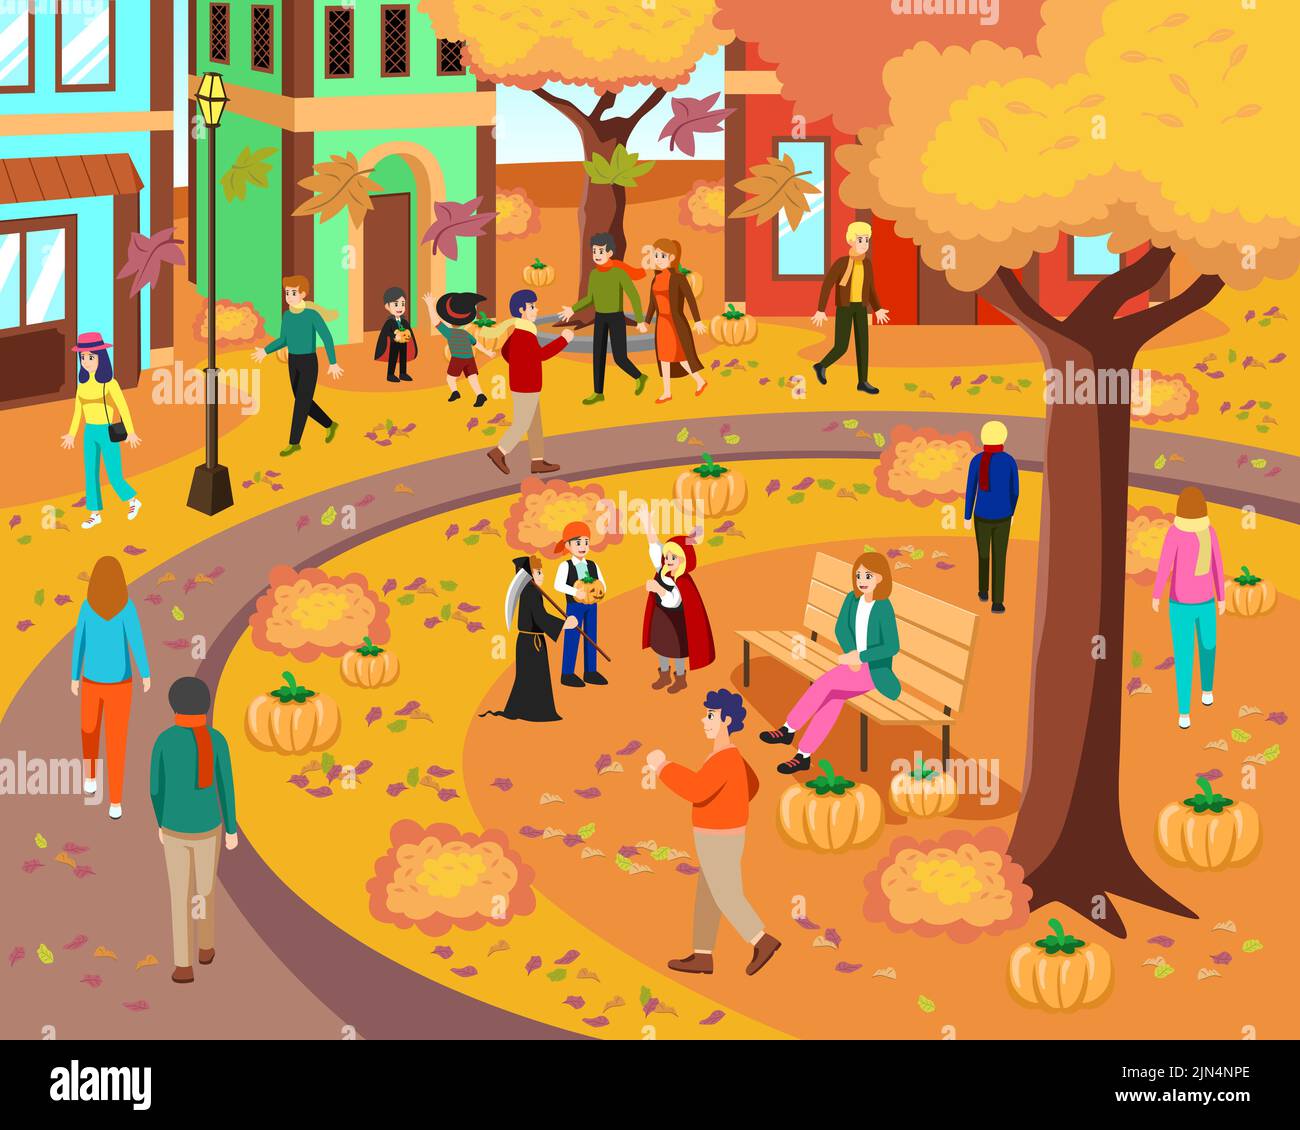 A vector illustration of People During Autumn or Fall Scene Stock Vector